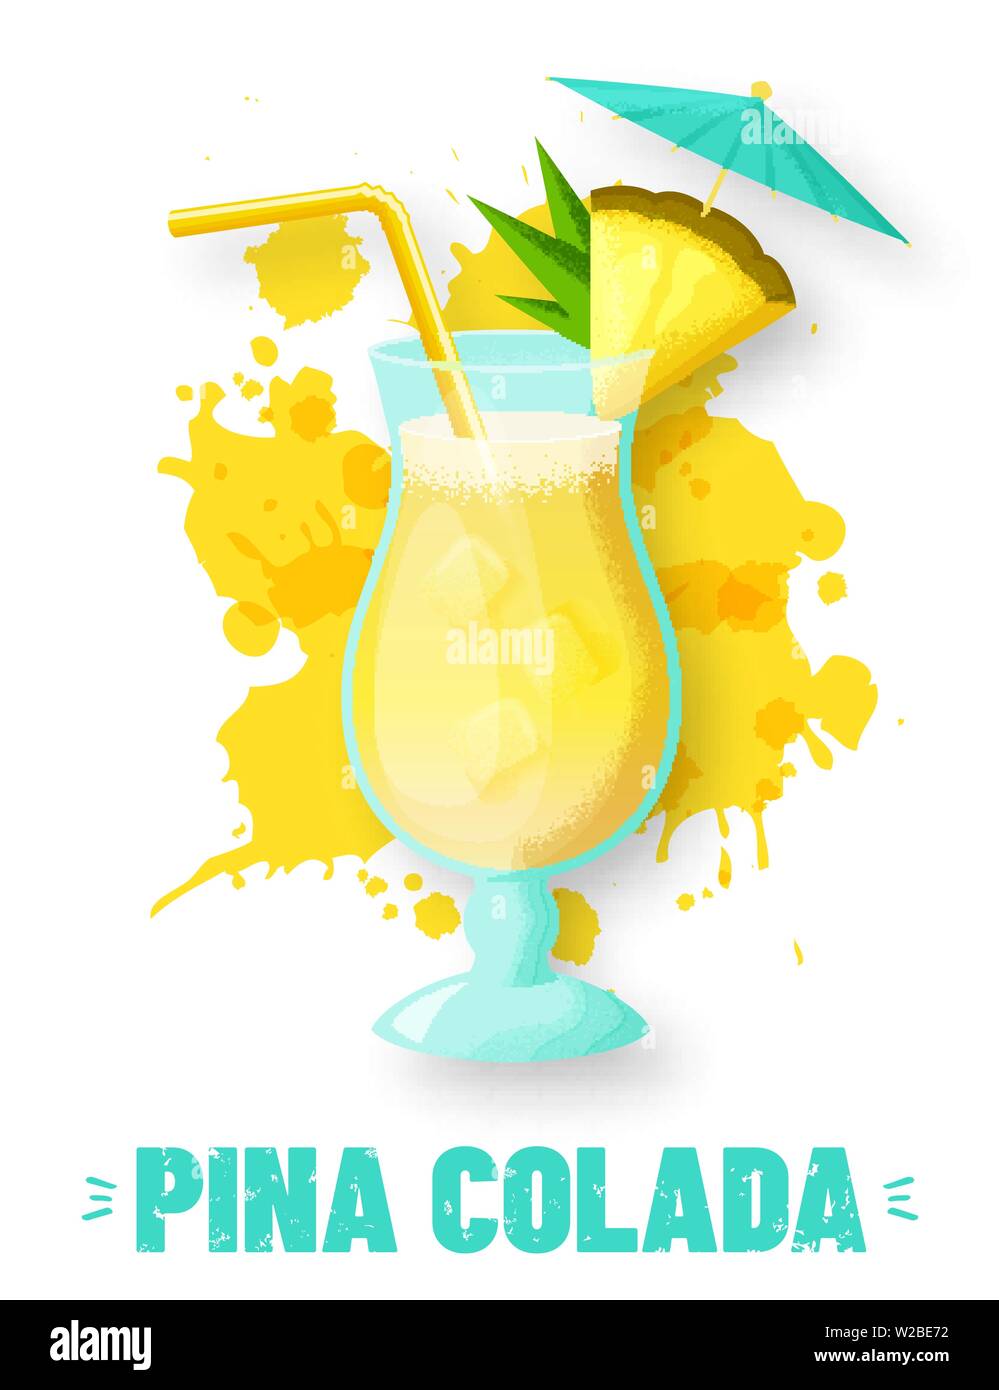 Pina colada with pineapple slice, straw and umbrella. Modern banner with glass of alcoholic drink and juice splashes. Vector illustration isolated on Stock Vector